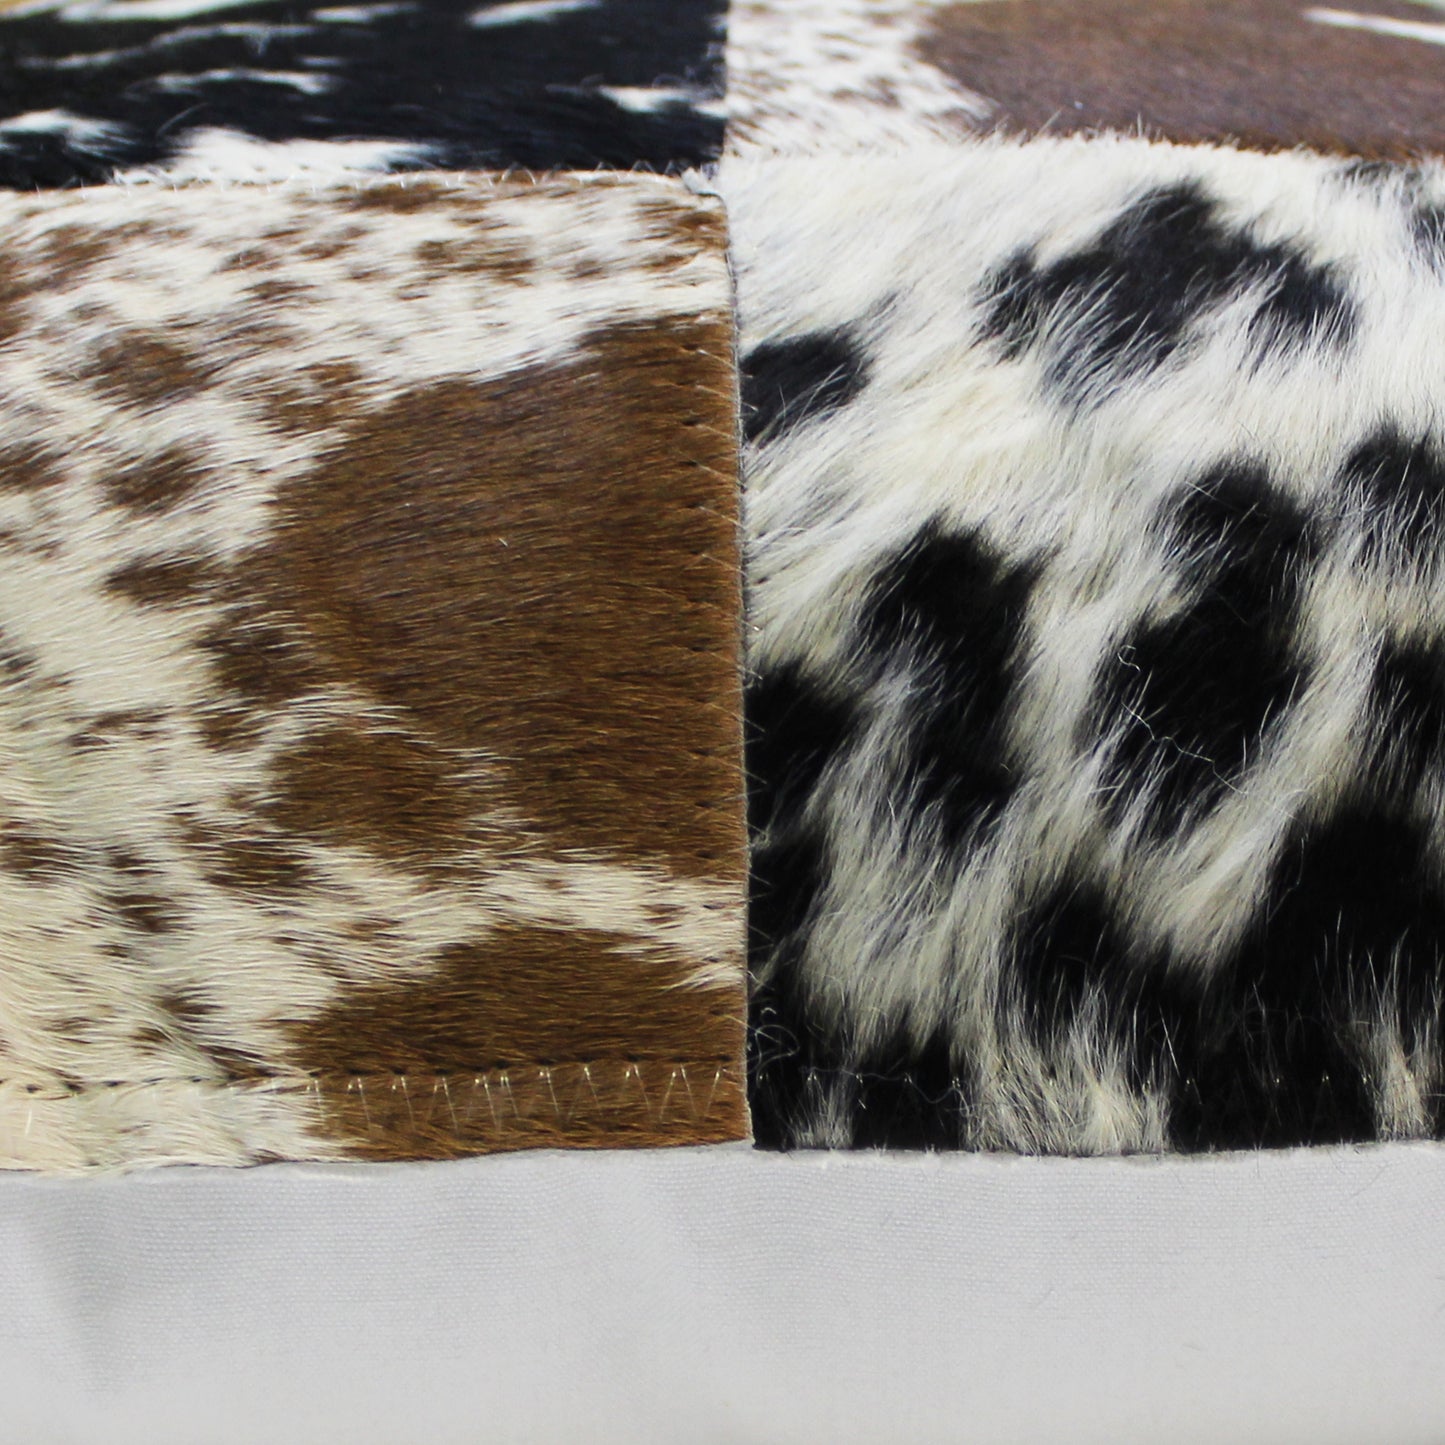 Natural Geo Herd Cowhide Black/Brown/White Square Decorative Throw Pillow